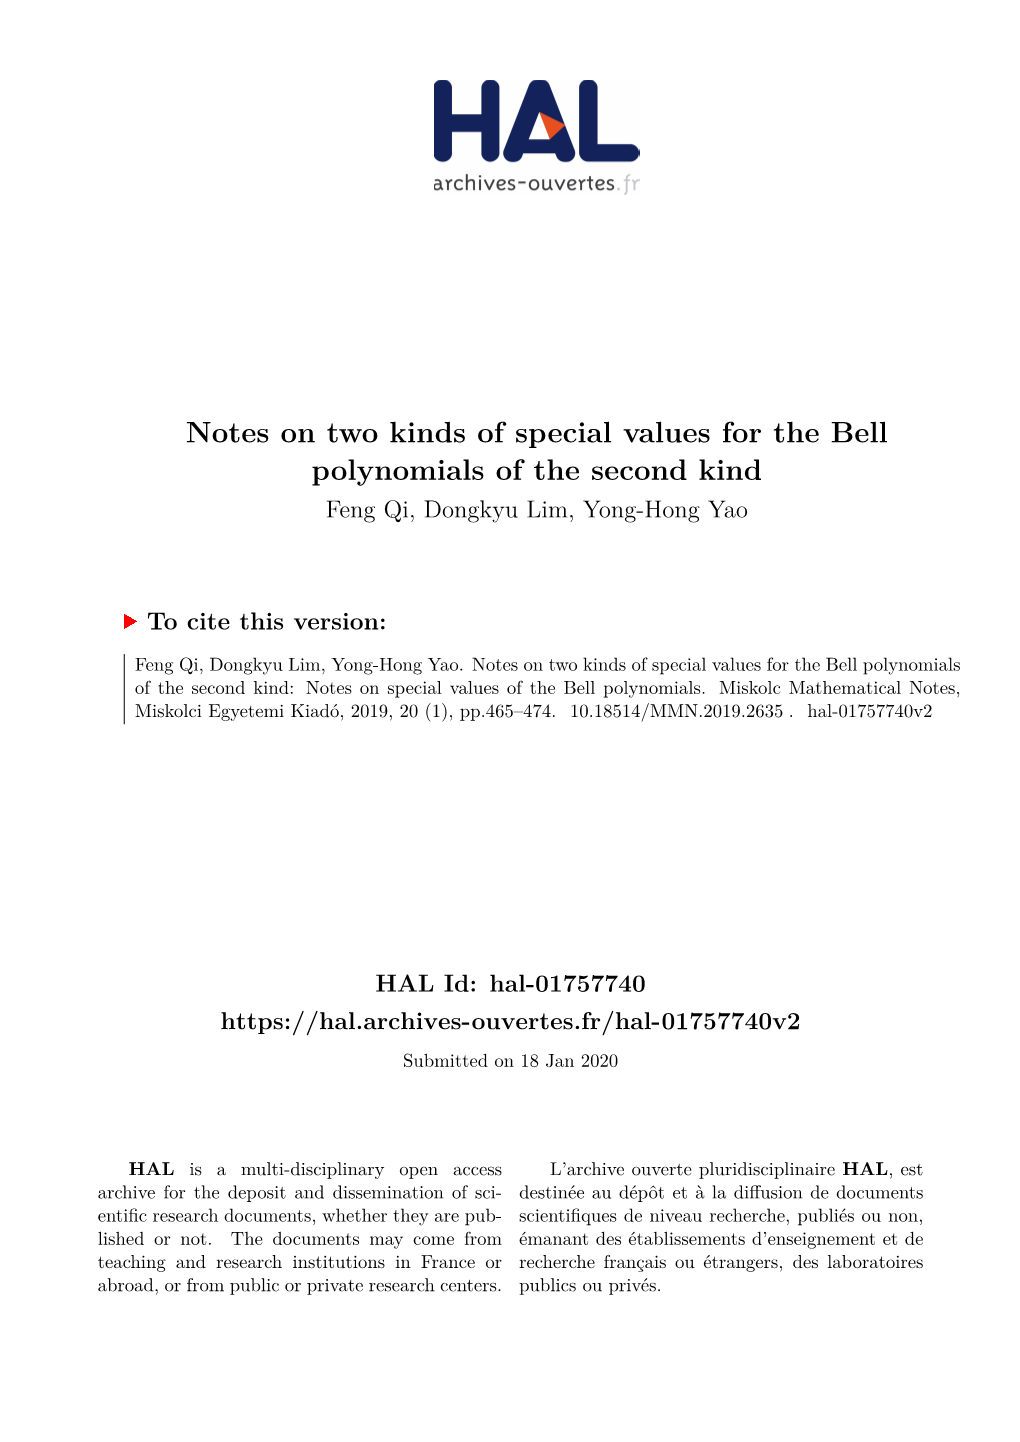 Notes on Two Kinds of Special Values for the Bell Polynomials of the Second Kind Feng Qi, Dongkyu Lim, Yong-Hong Yao